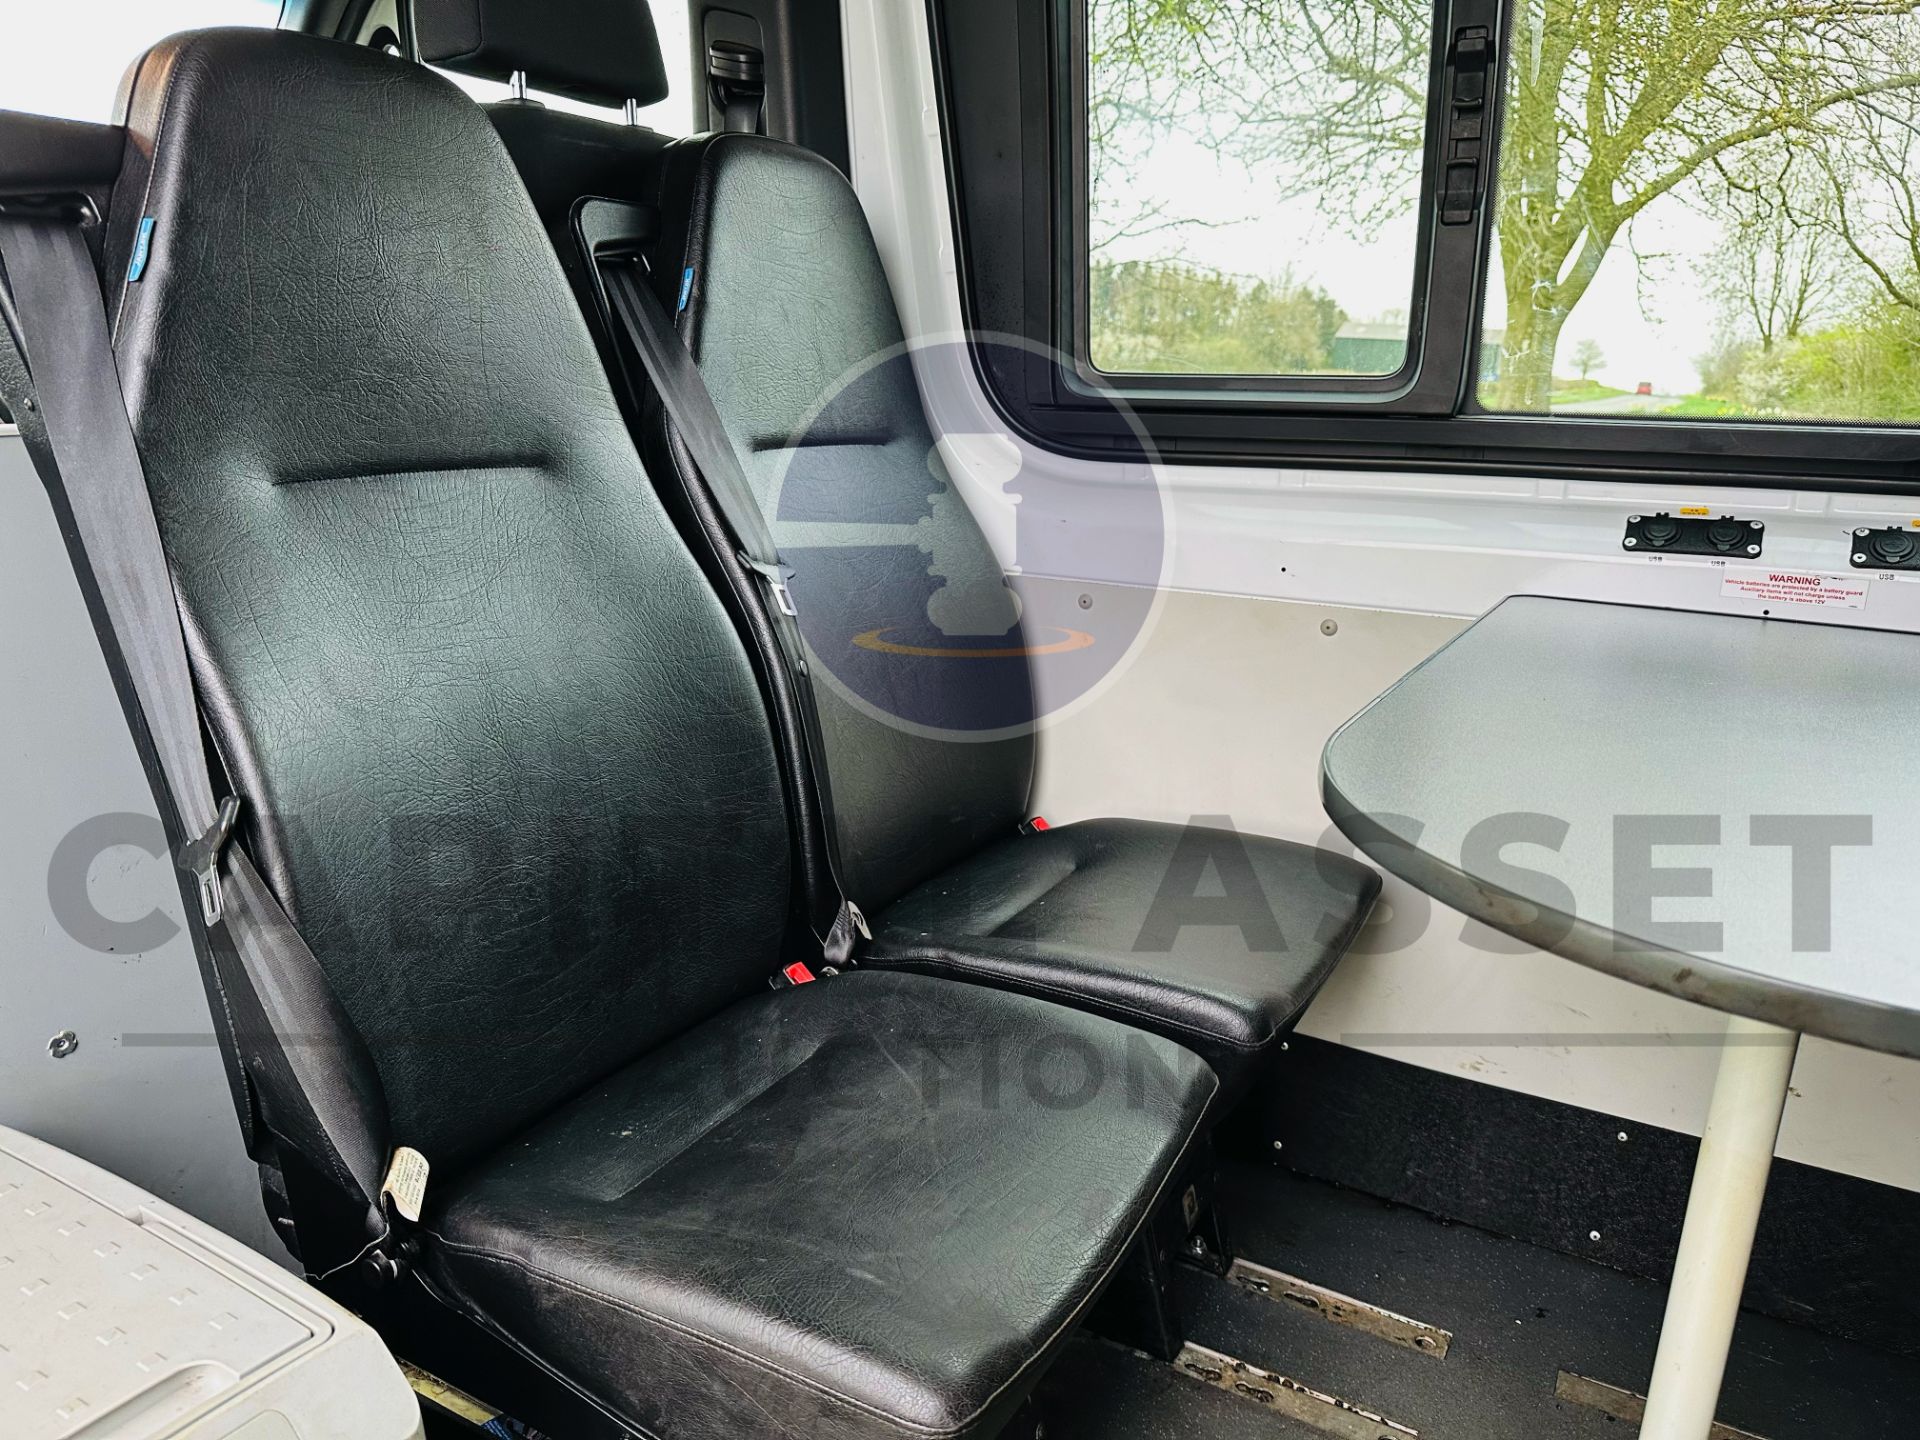 (ON SALE) MERCEDES SPRINTER 314CDI AUTO MWB MESSING UNIT WITH W/C,MICROWAVE,- 2020 REG- - AIR CON - Image 19 of 44